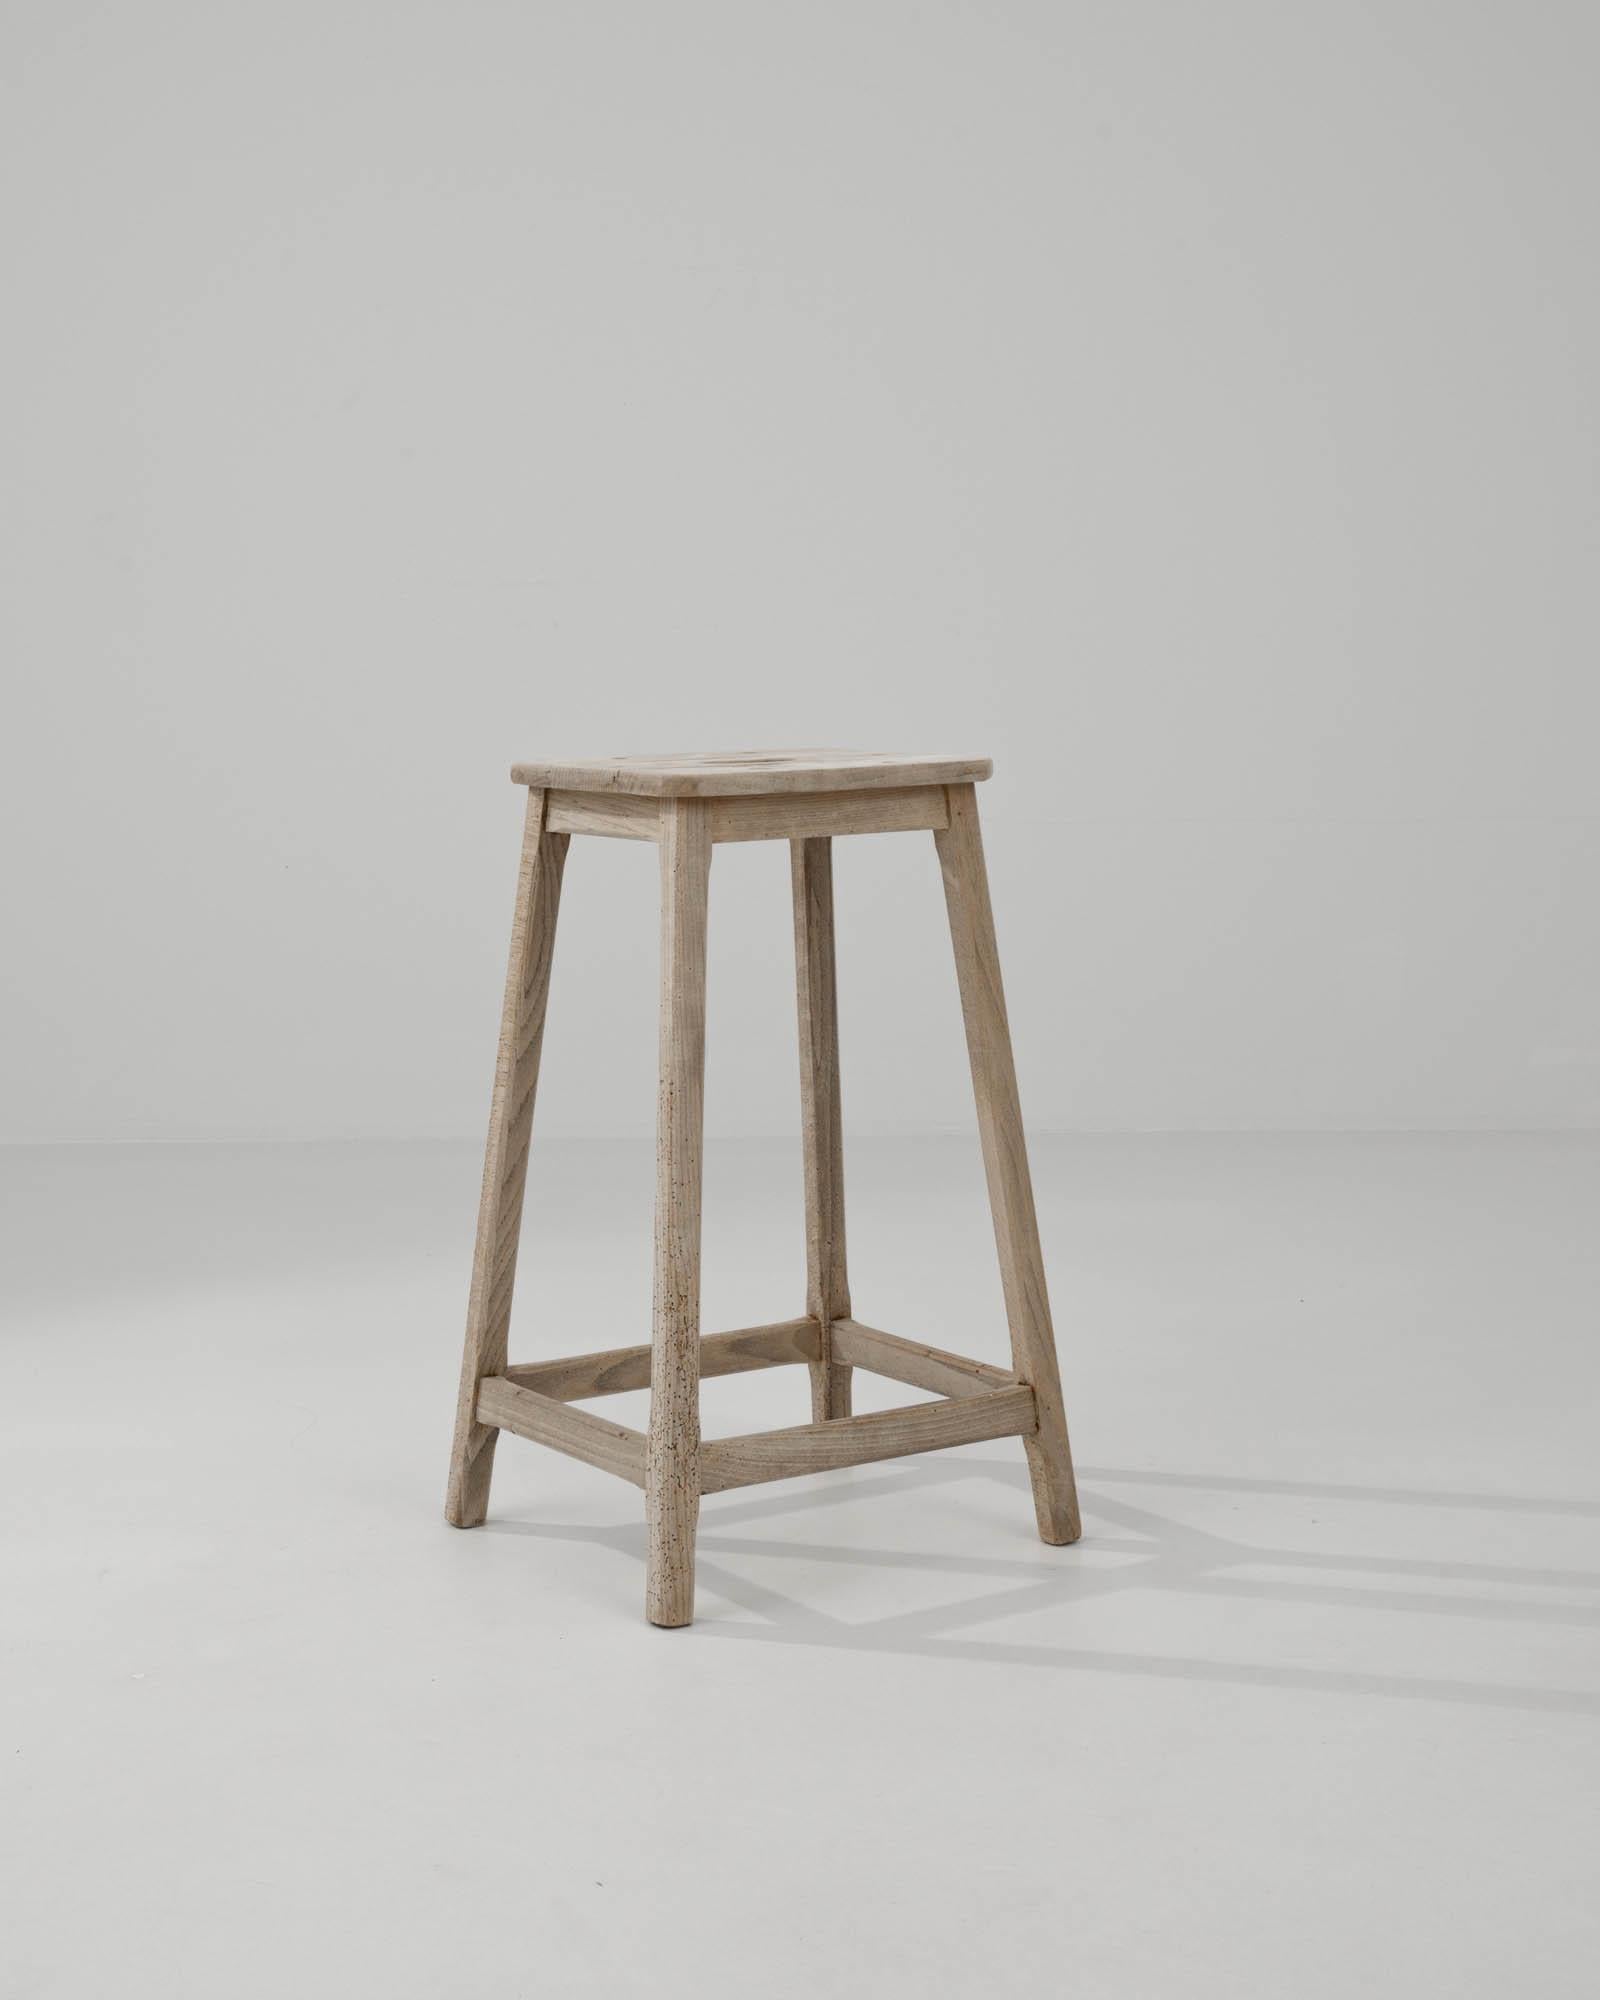 Simple yet charming, this country bar stool makes a delightful vintage accent. Built in France circa 1900, featuring splayed legs joined by square stretchers and assembled with mortise and tenon joints. This distinctive trapezoid stance gives the